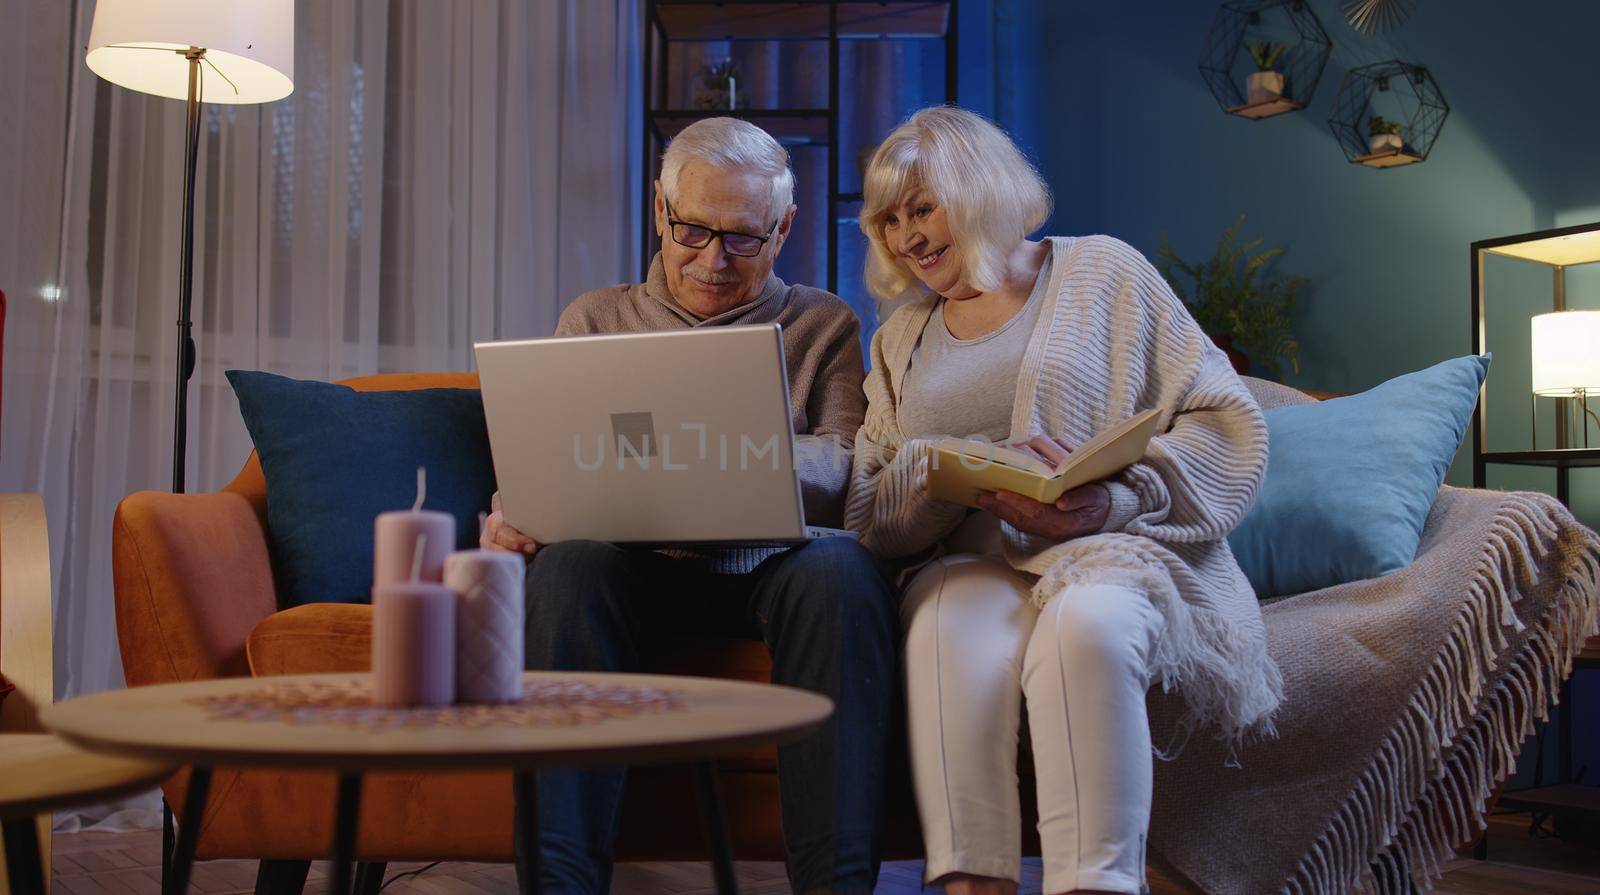 Happy senior grandparents couple relaxing enjoying leisure hobbies on couch in living room at home, elderly wife grandma reading book while older husband grandpa using laptop pc receiving good news